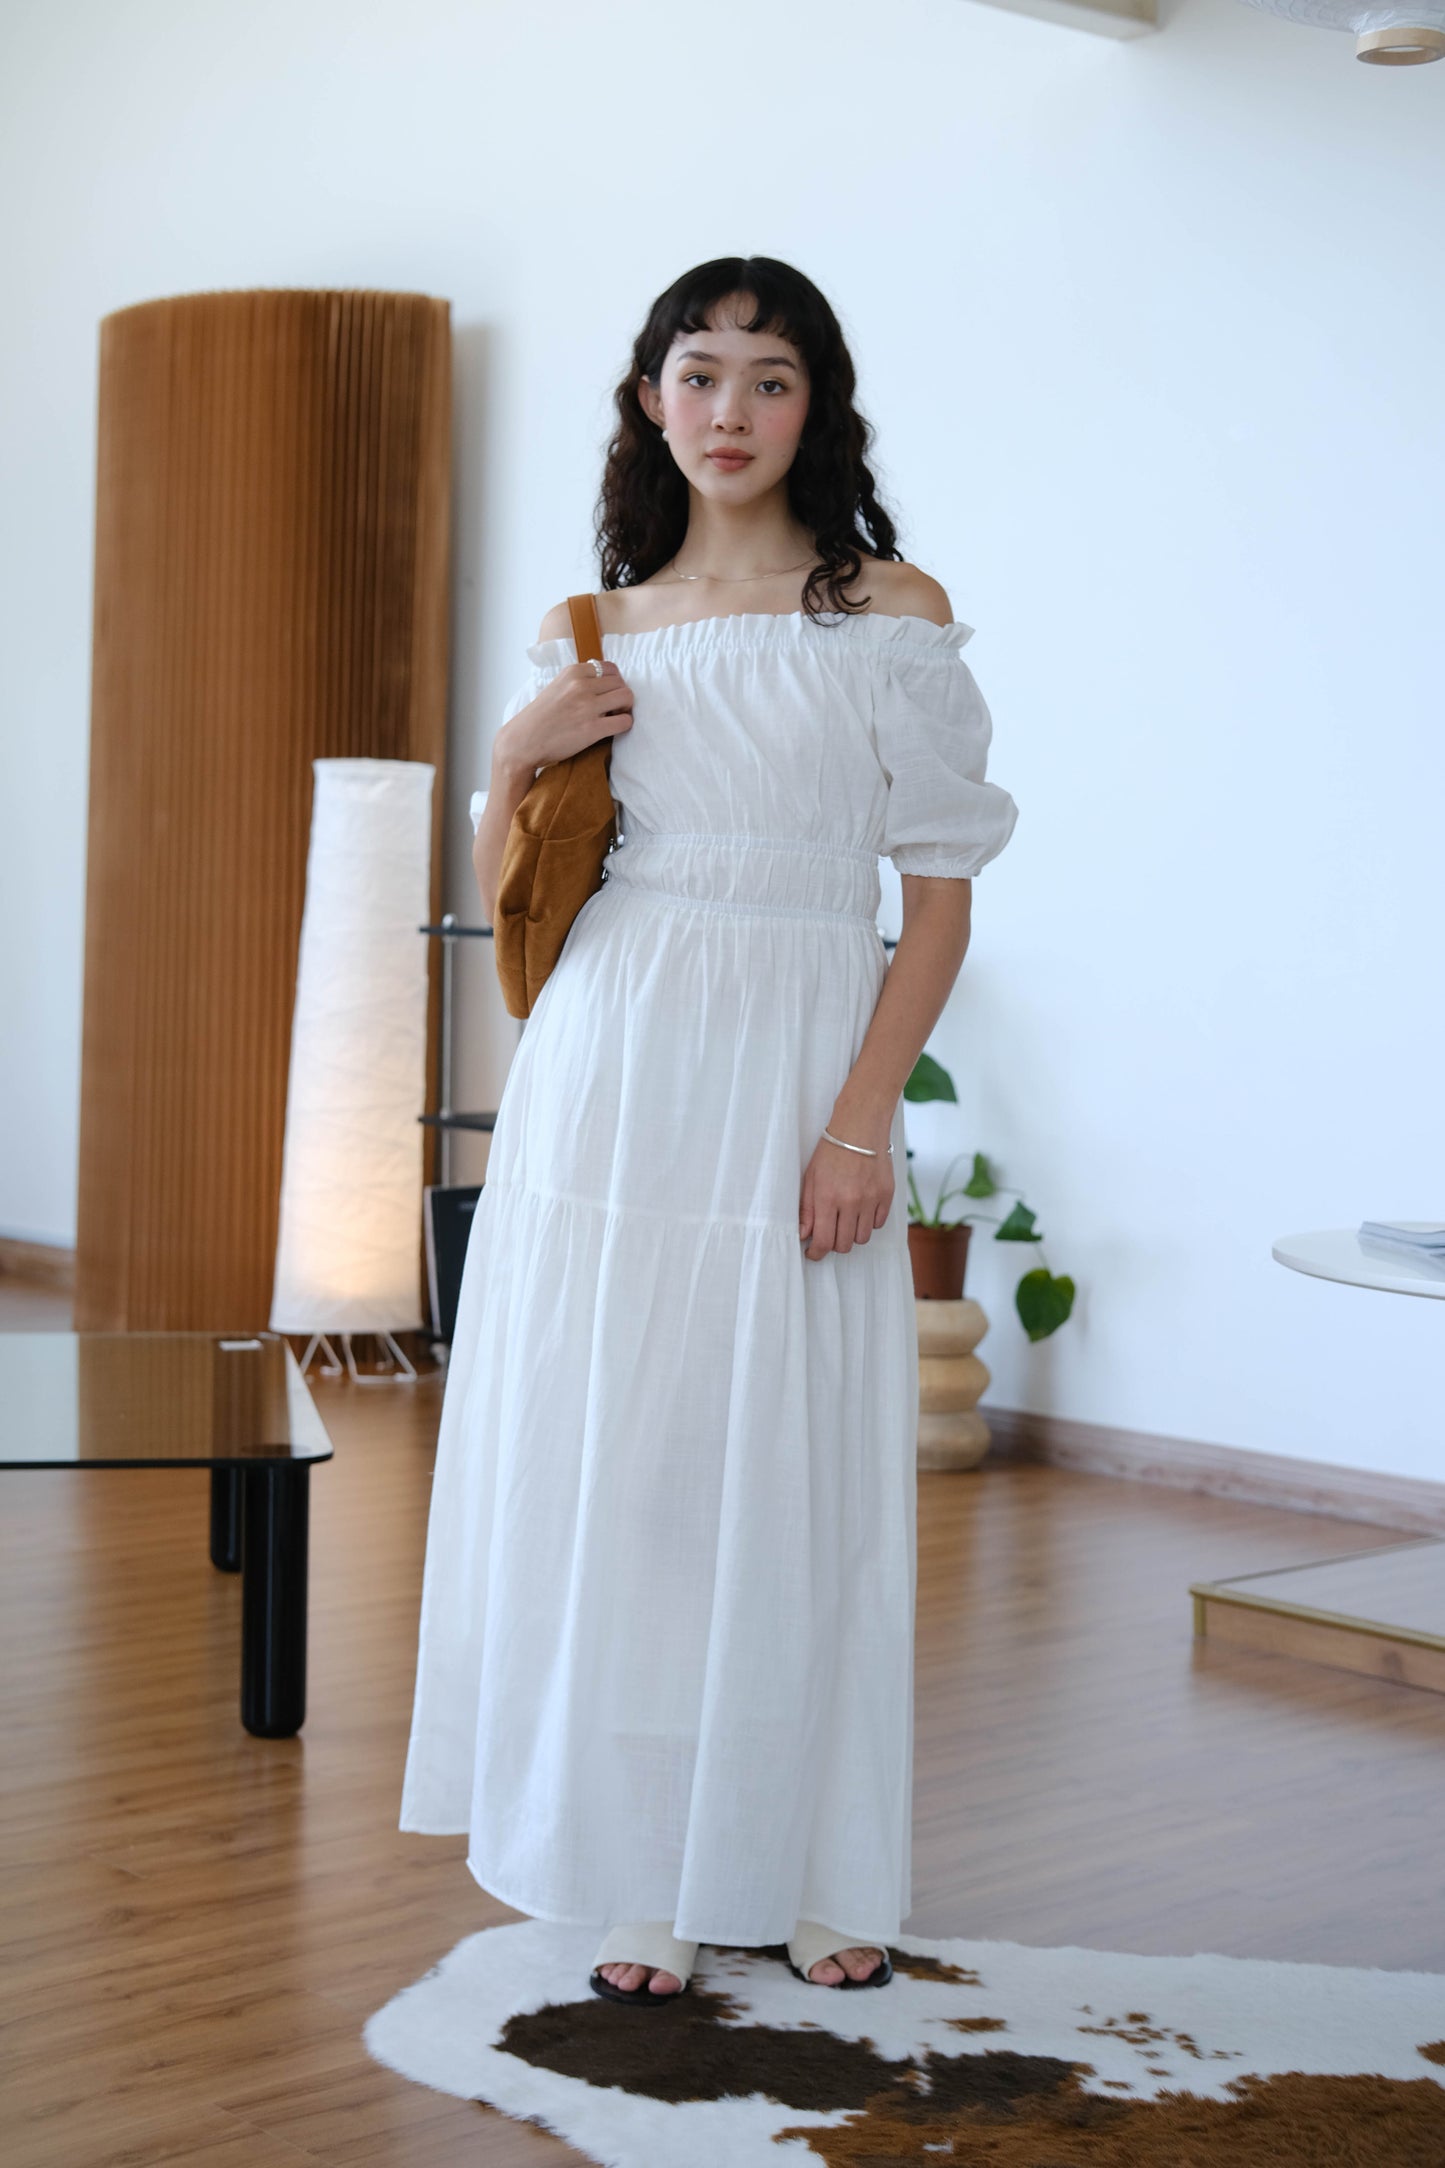 A-line dress in snow white